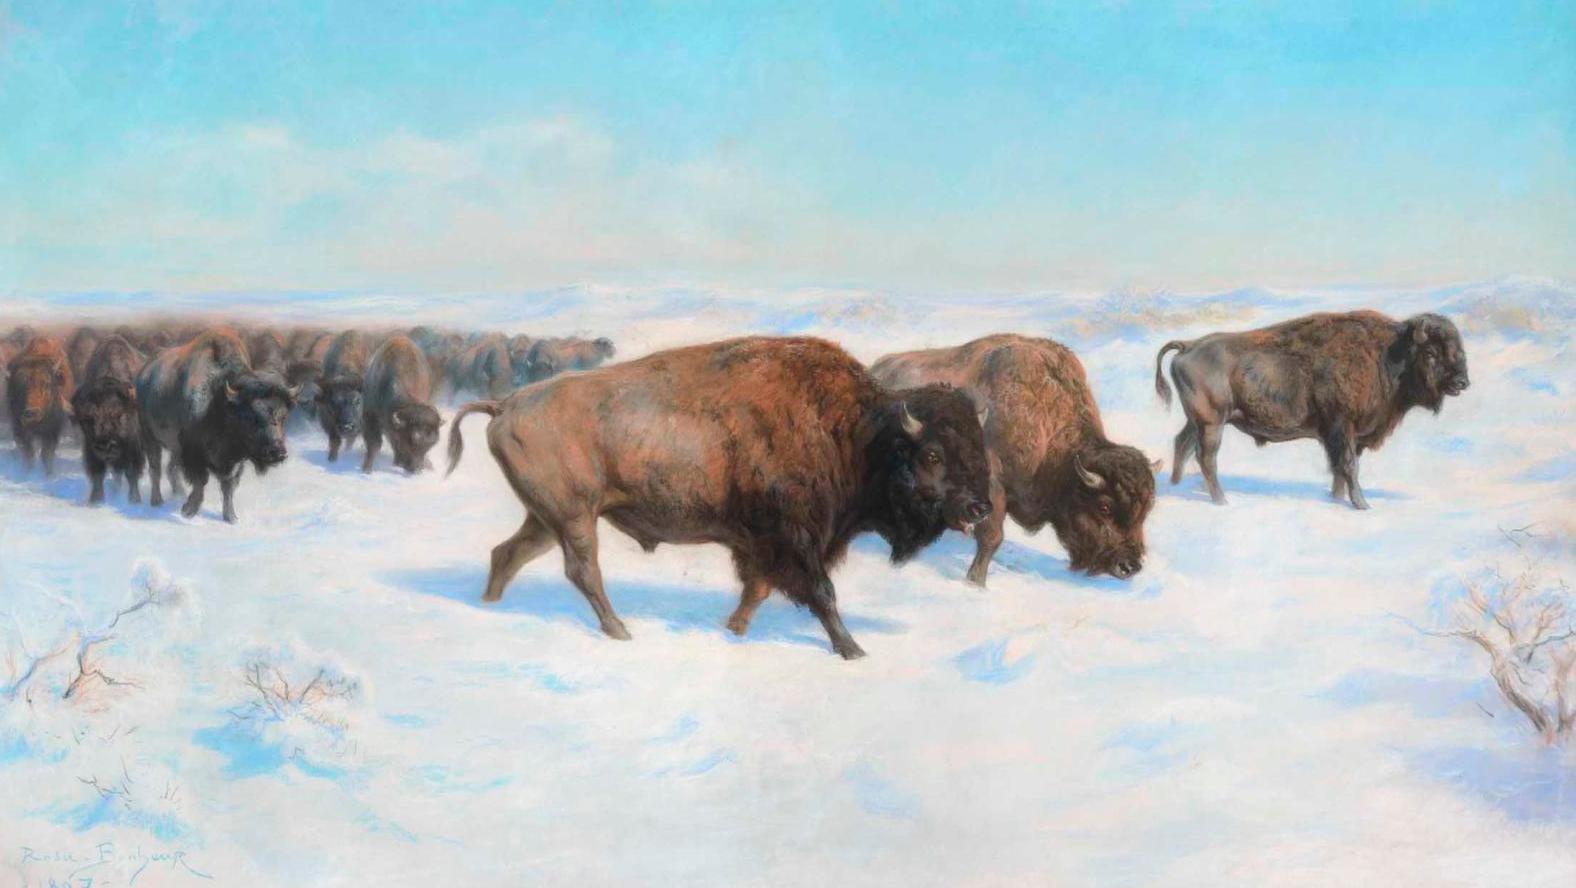 The record is $773,500, which the 1897 Migration of bison achieved in the United... Art Market Overview: Rosa Bonheur, a Winning Bicentenary?